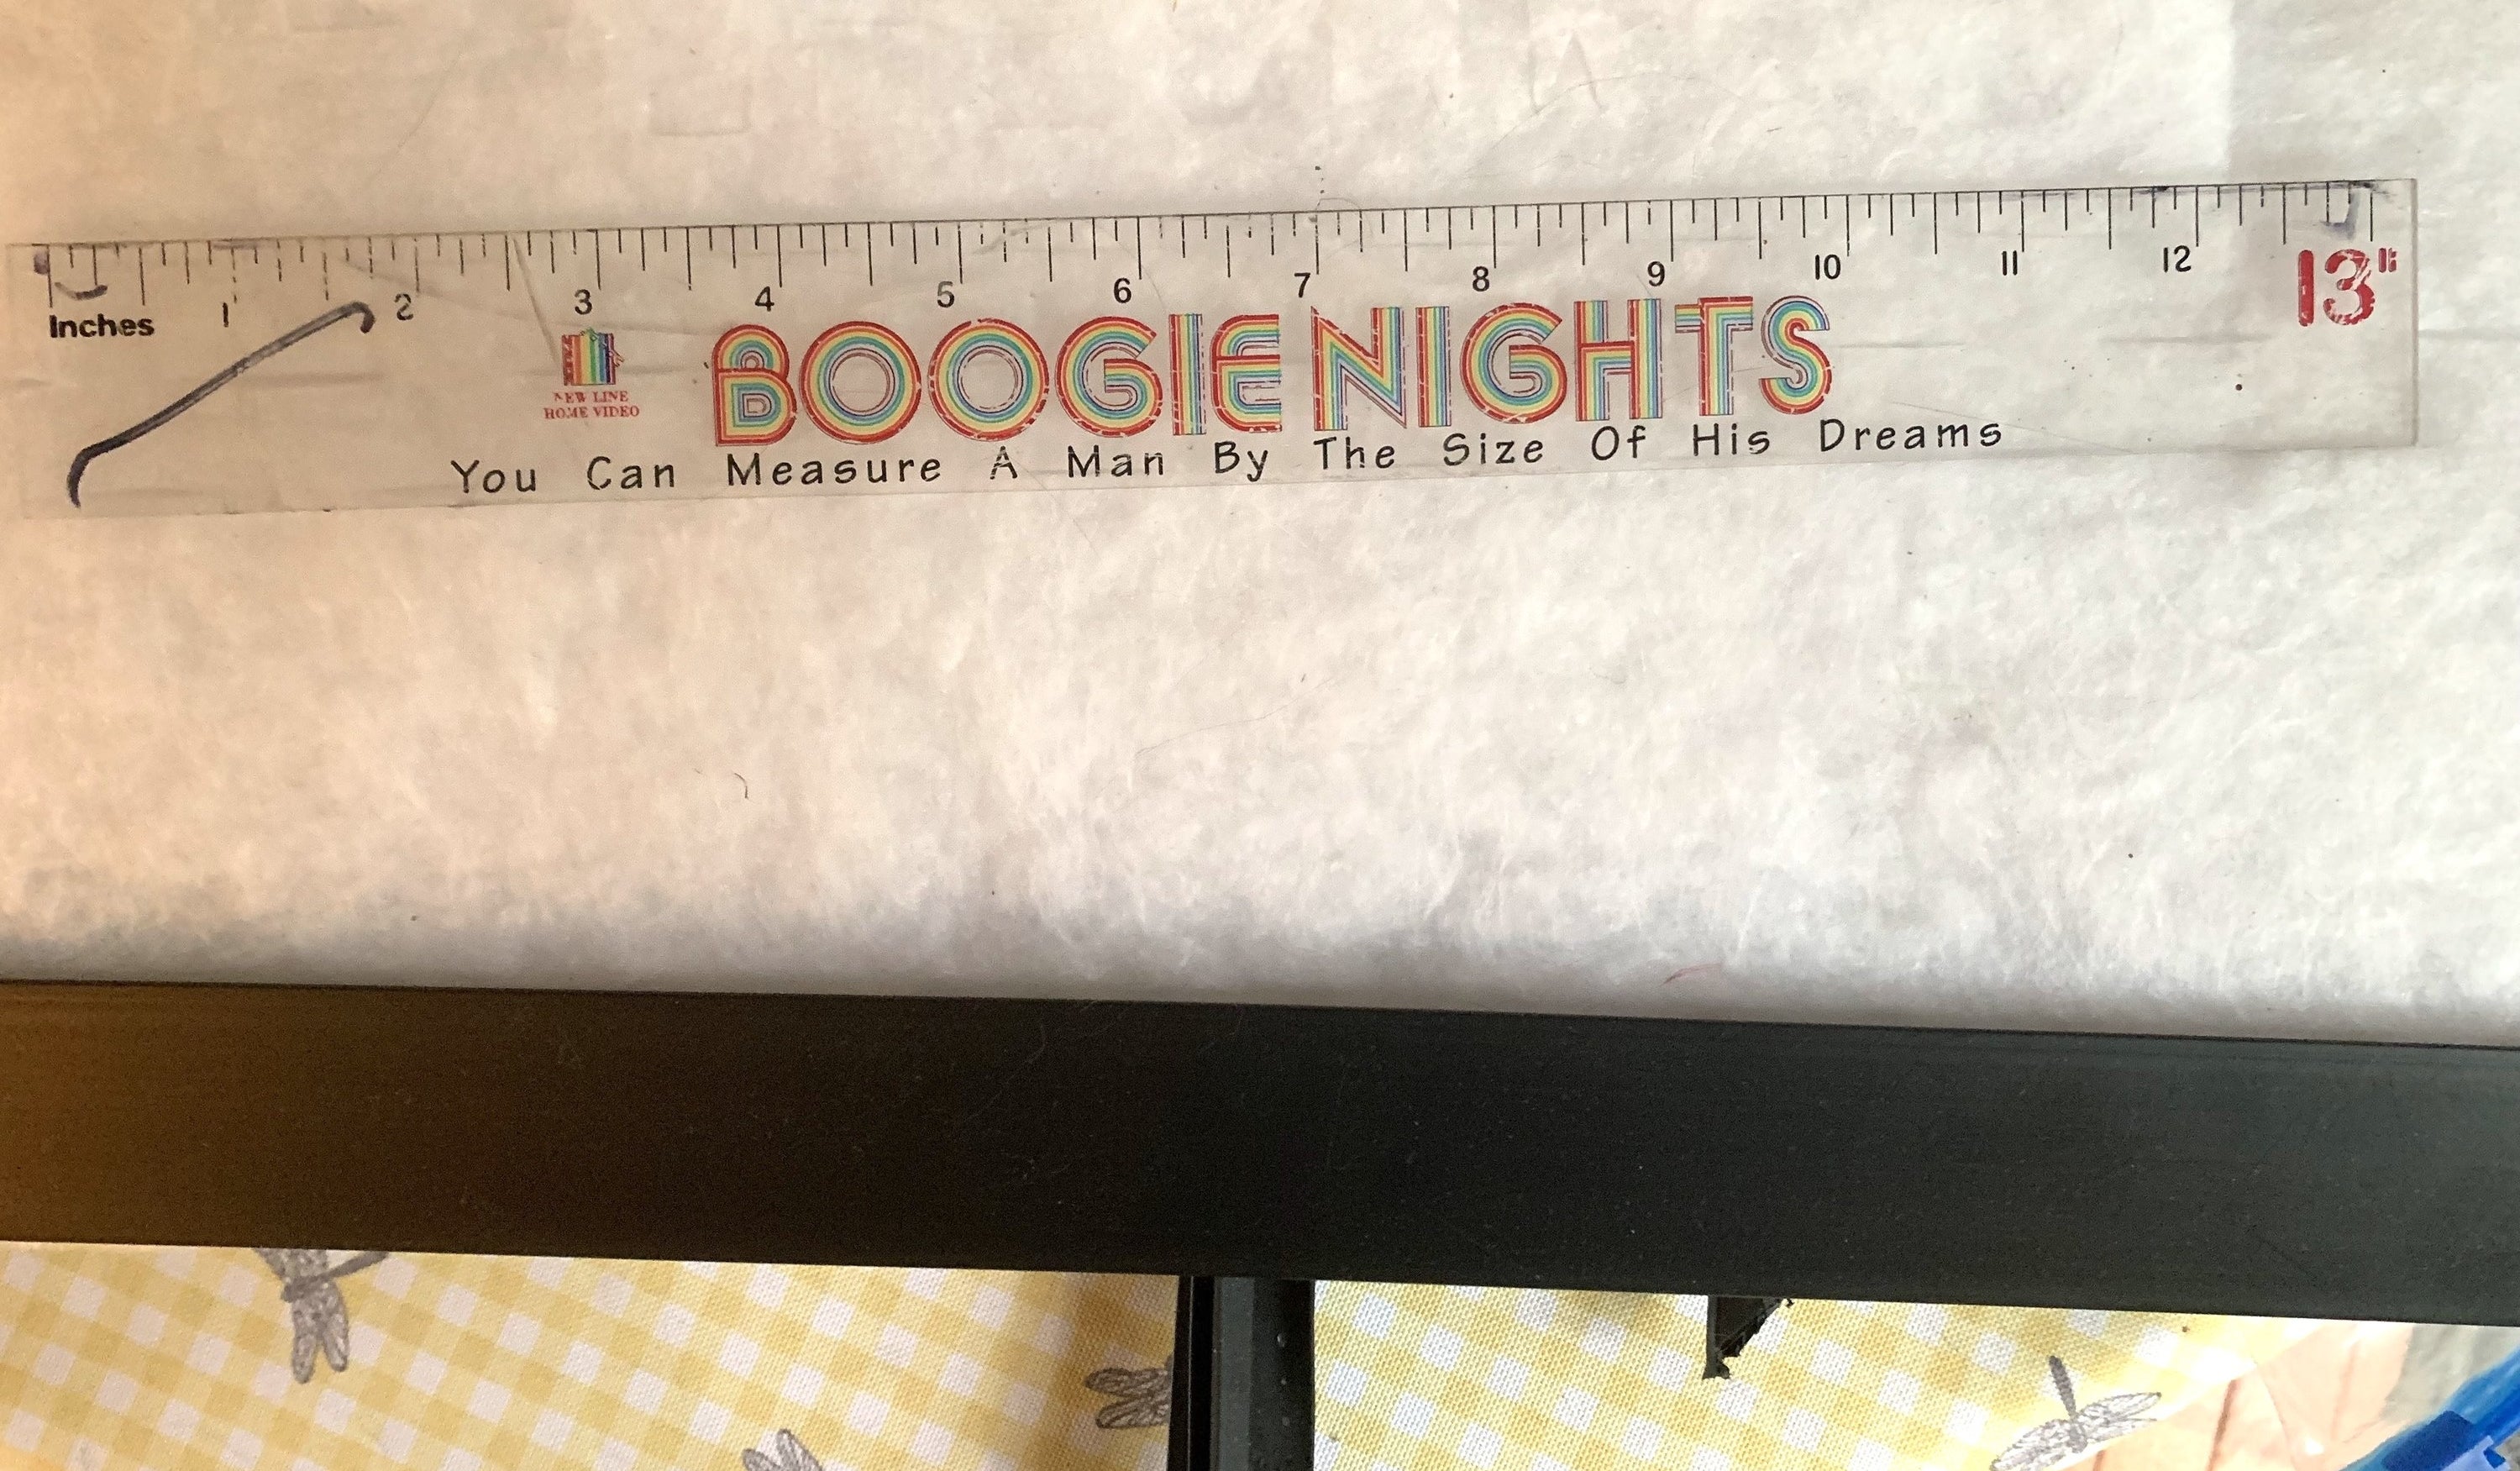 a clear ruler with the Boogie Nights logo